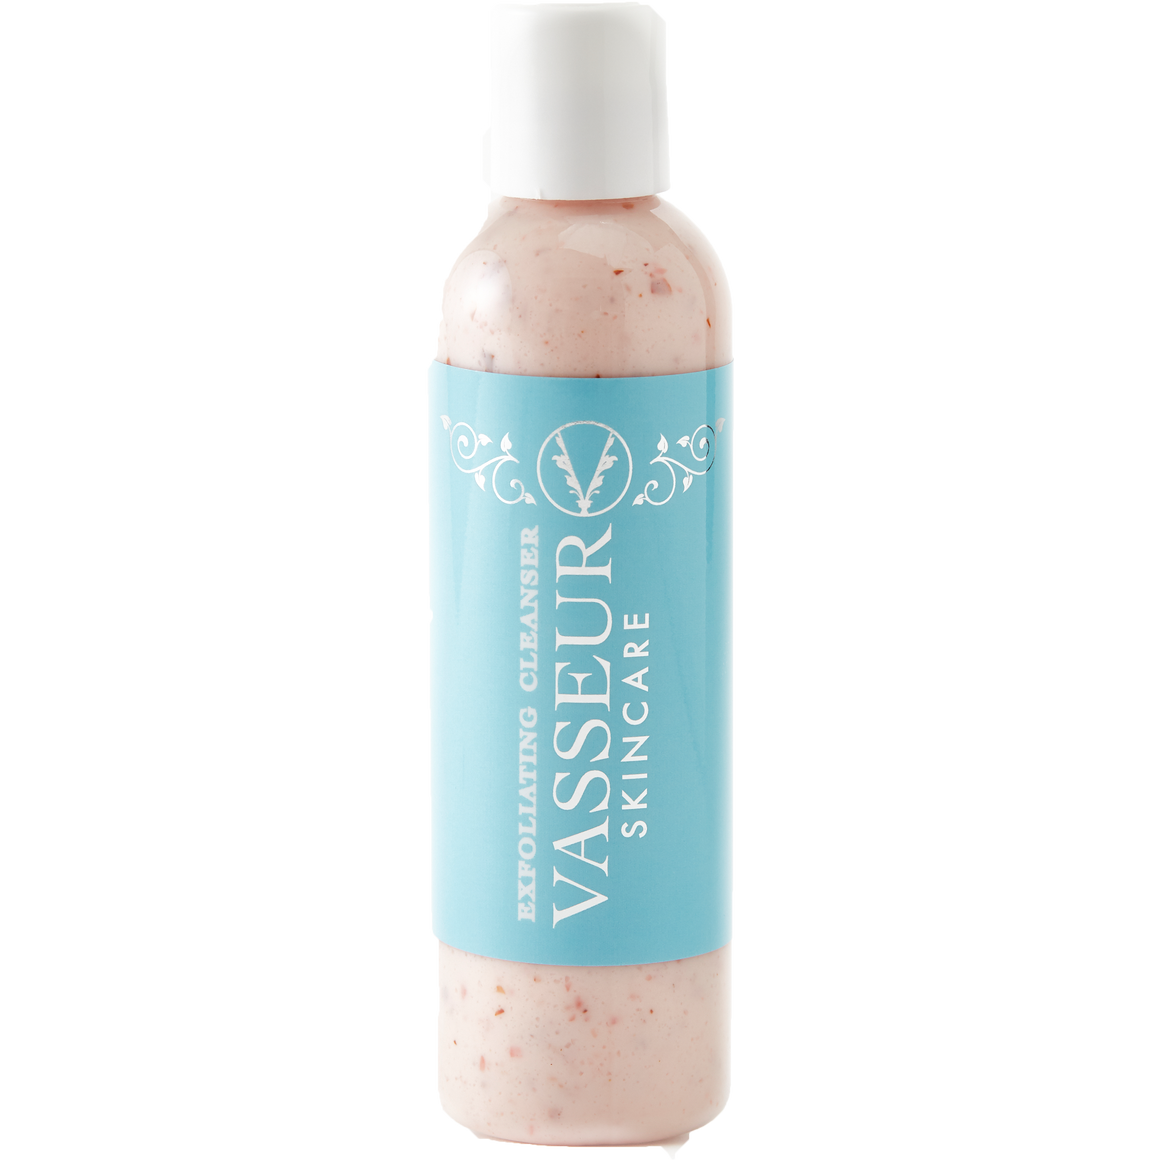 Gentle exfoliating cleanser that is designed to remove dead, dry skin and leave your face glowing and silky smooth. Deep skin cleaning, exfoliating, exfoliate, exfoliator, dirt removal 